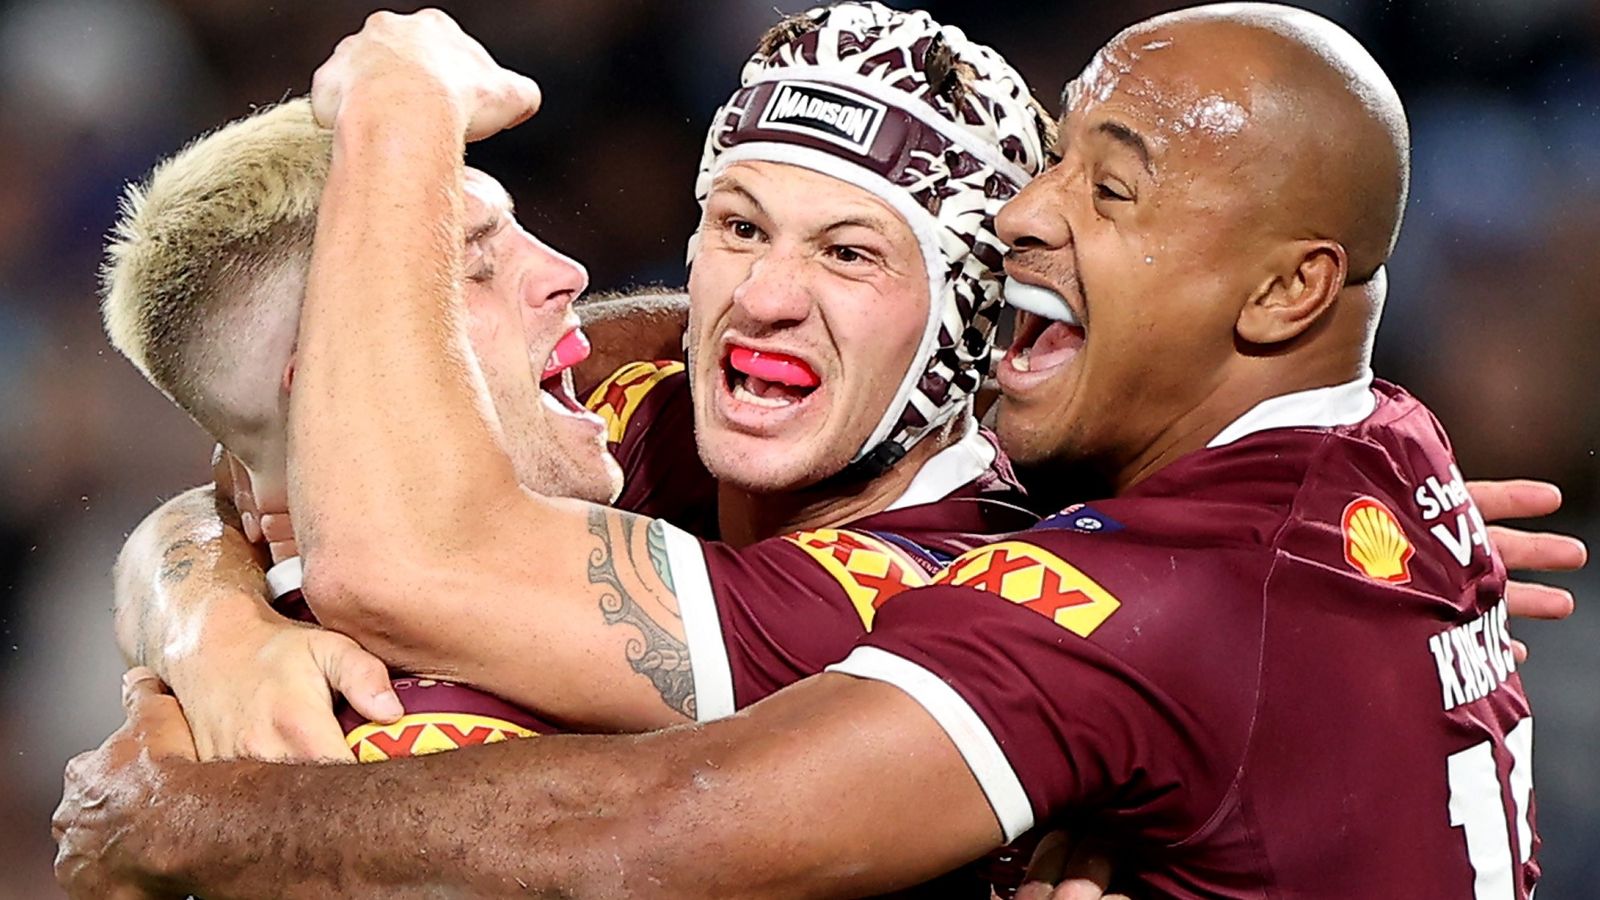 State of Origin: Queensland hold off New South Wales comeback to clinch victory